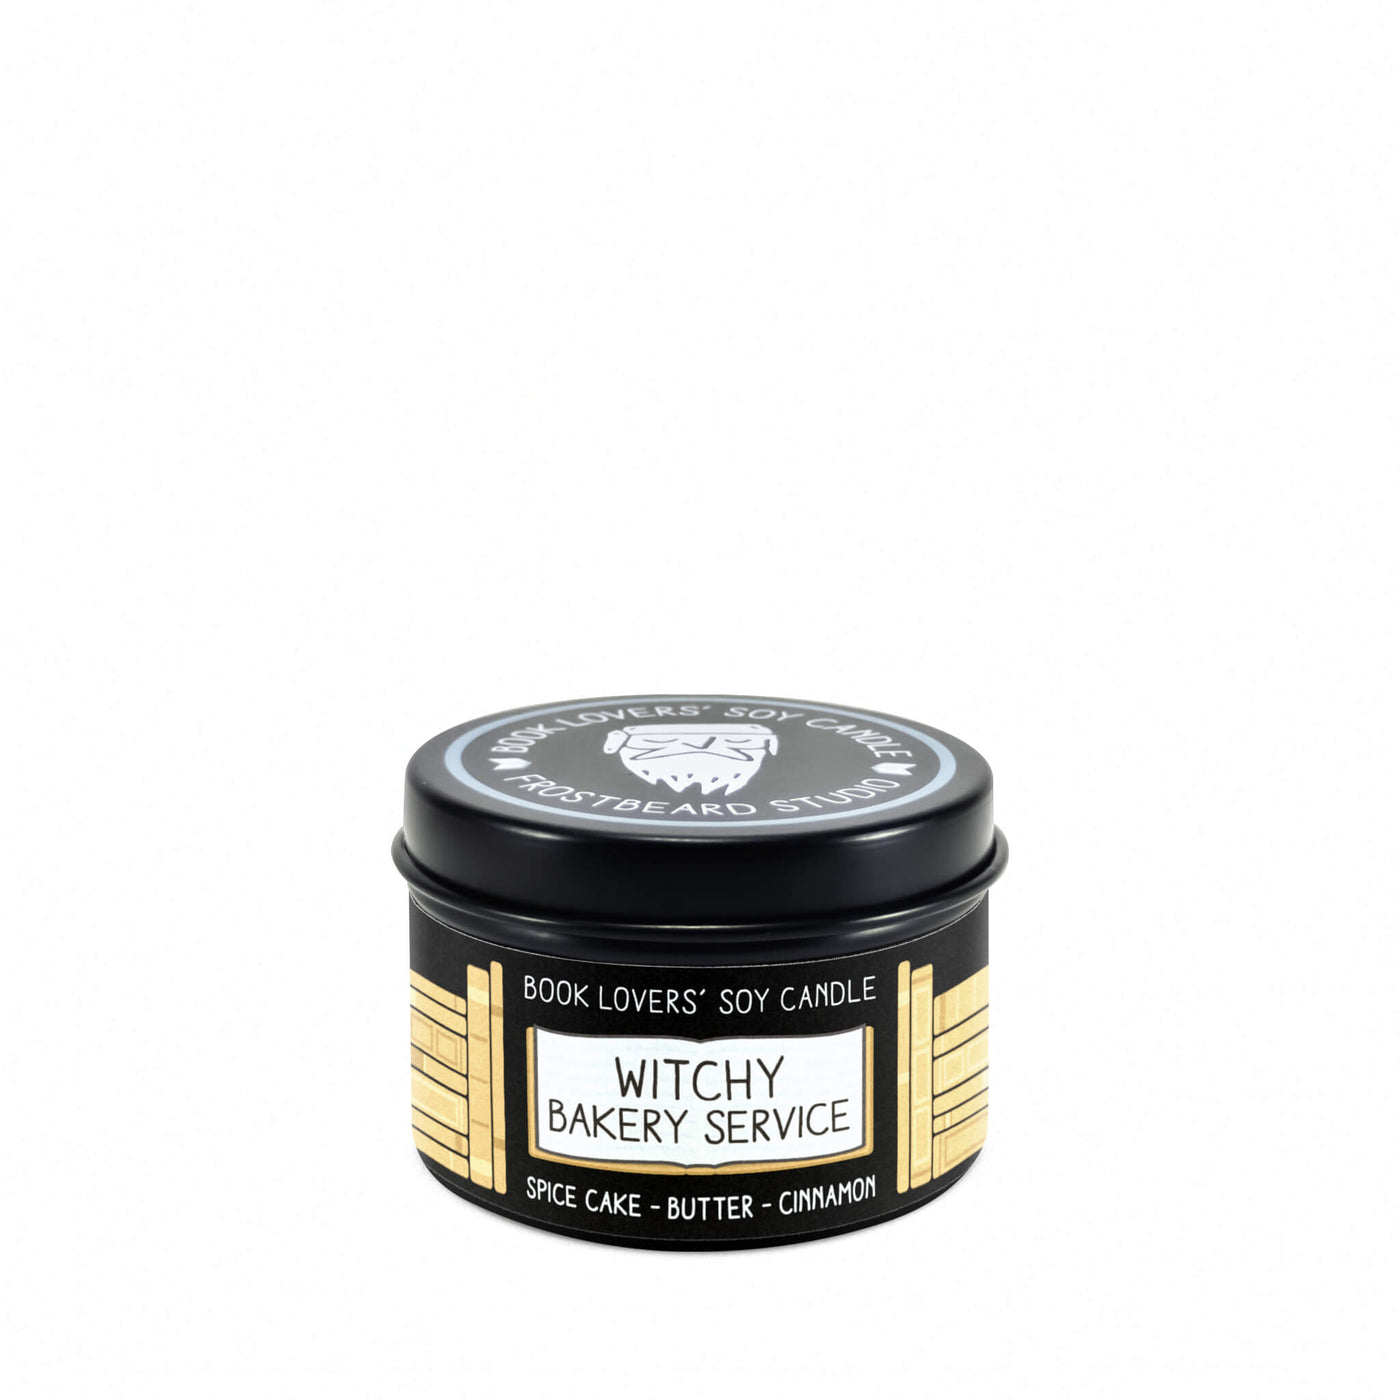 Witchy Bakery Service  -  2 oz Tin  -  Book Lovers' Soy Candle  -  Frostbeard Studio